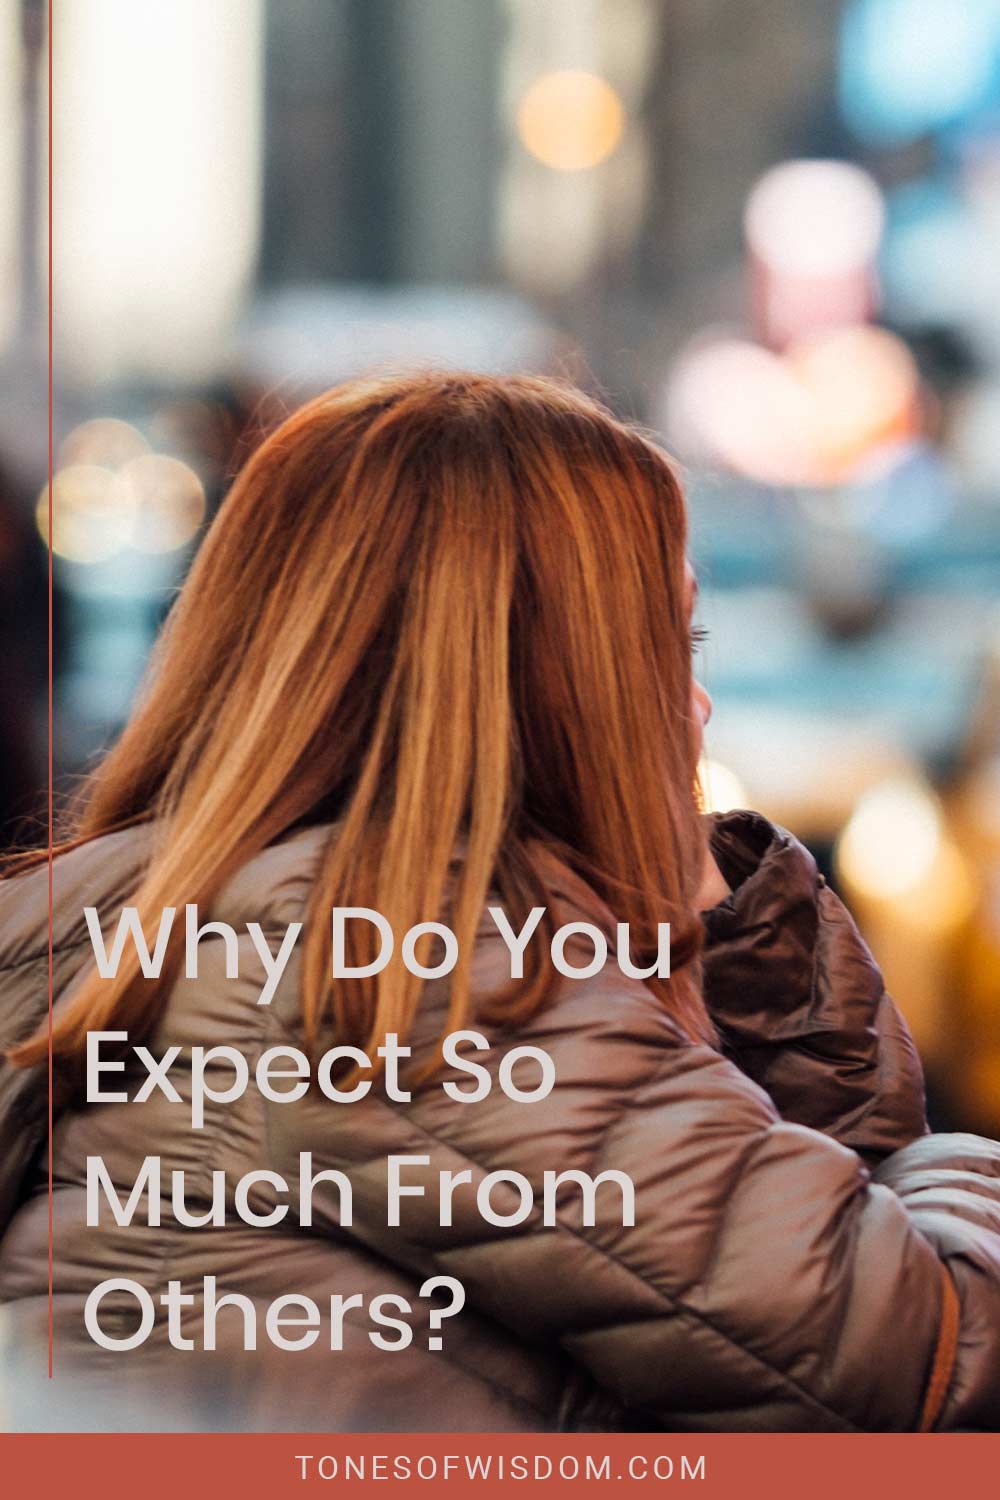 Why Do You Expect So Much From Others?